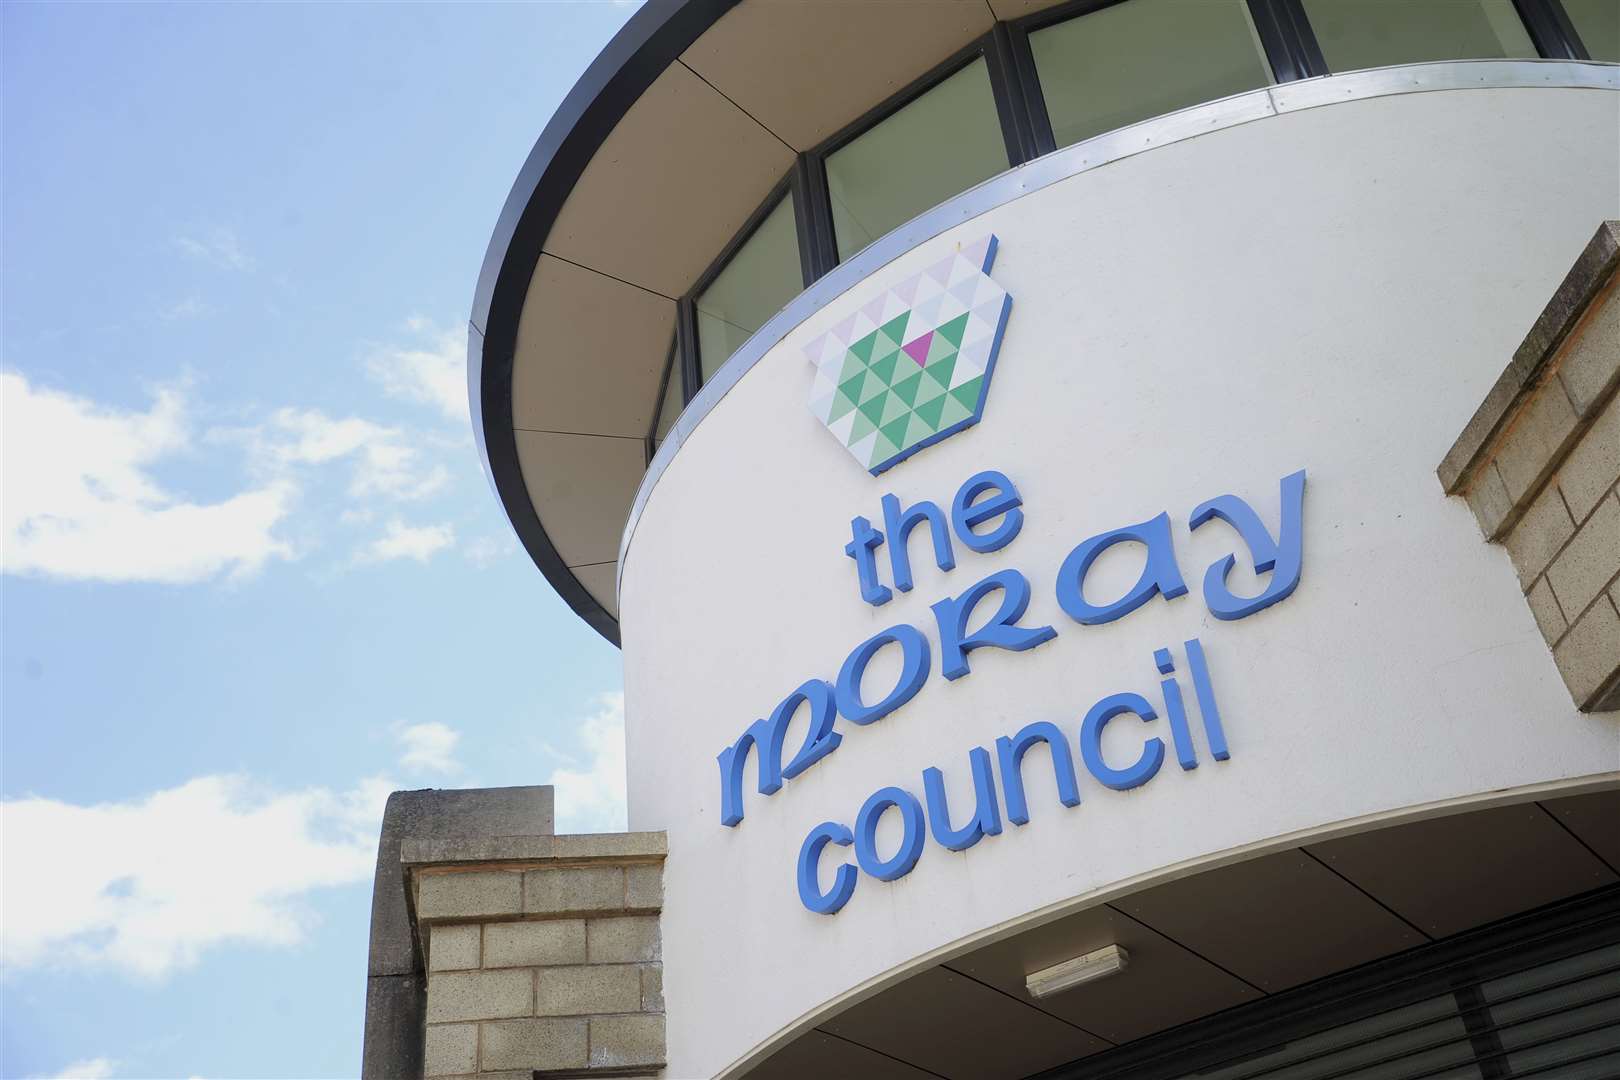 Locator photos of the Moray Council Annexe, High Street Elgin...Picture: Daniel Forsyth. Image No..